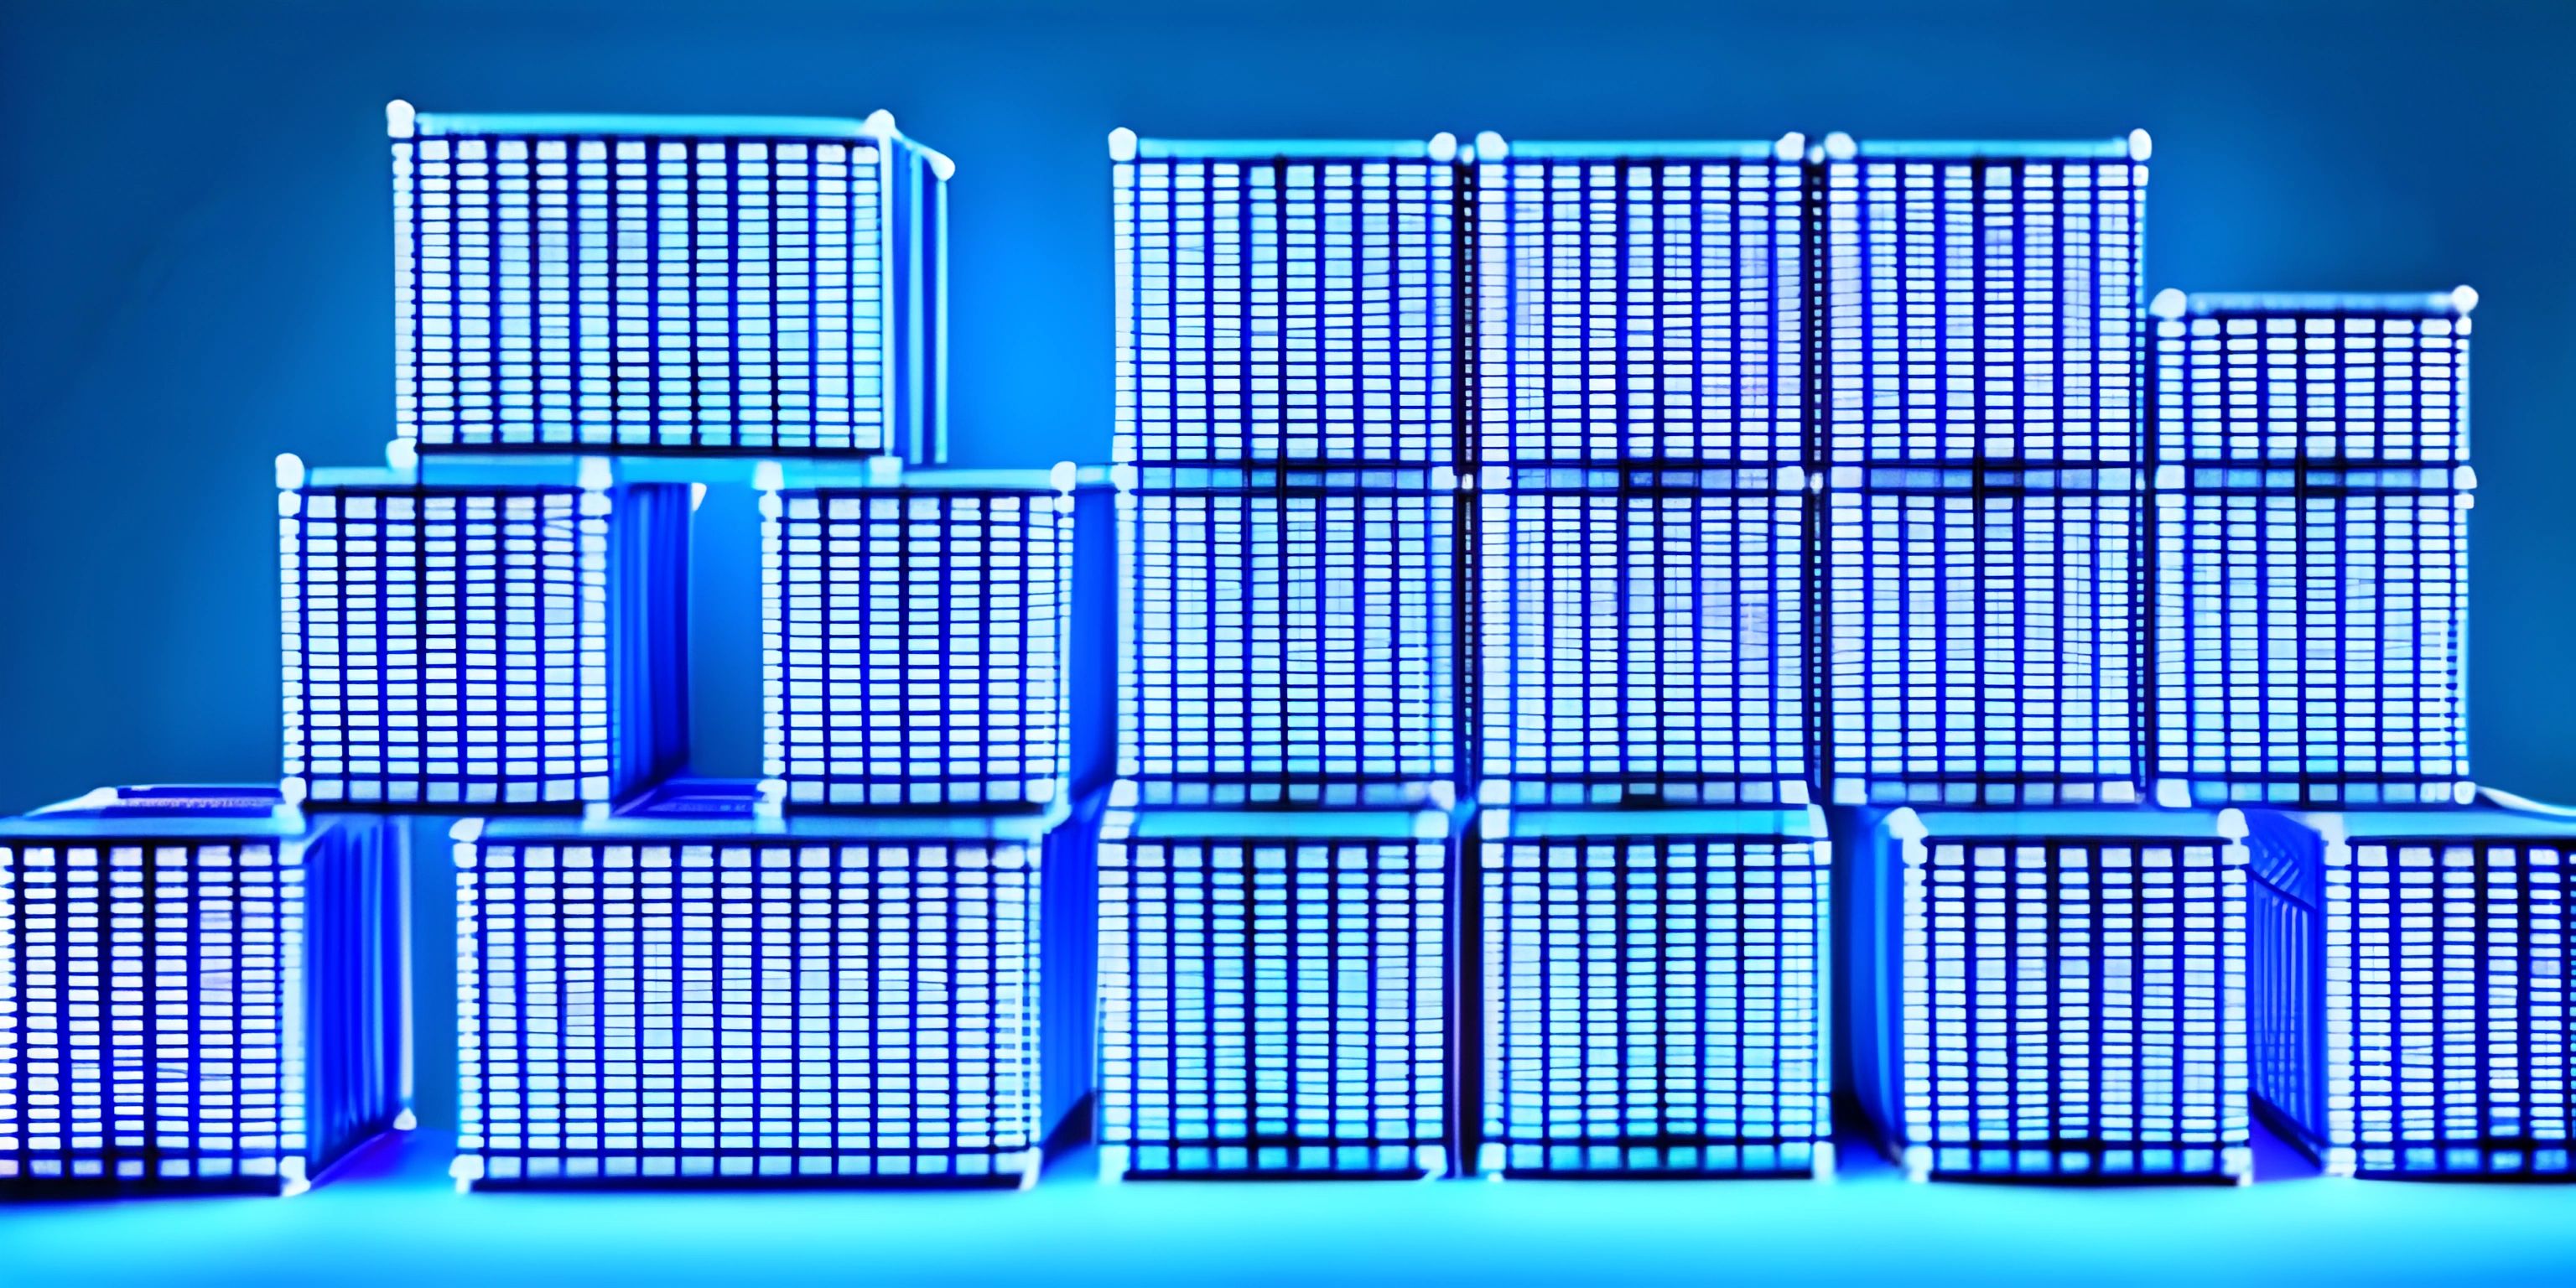 many glowing boxes on a blue background and some lights around them are glowing and they appear to be neon